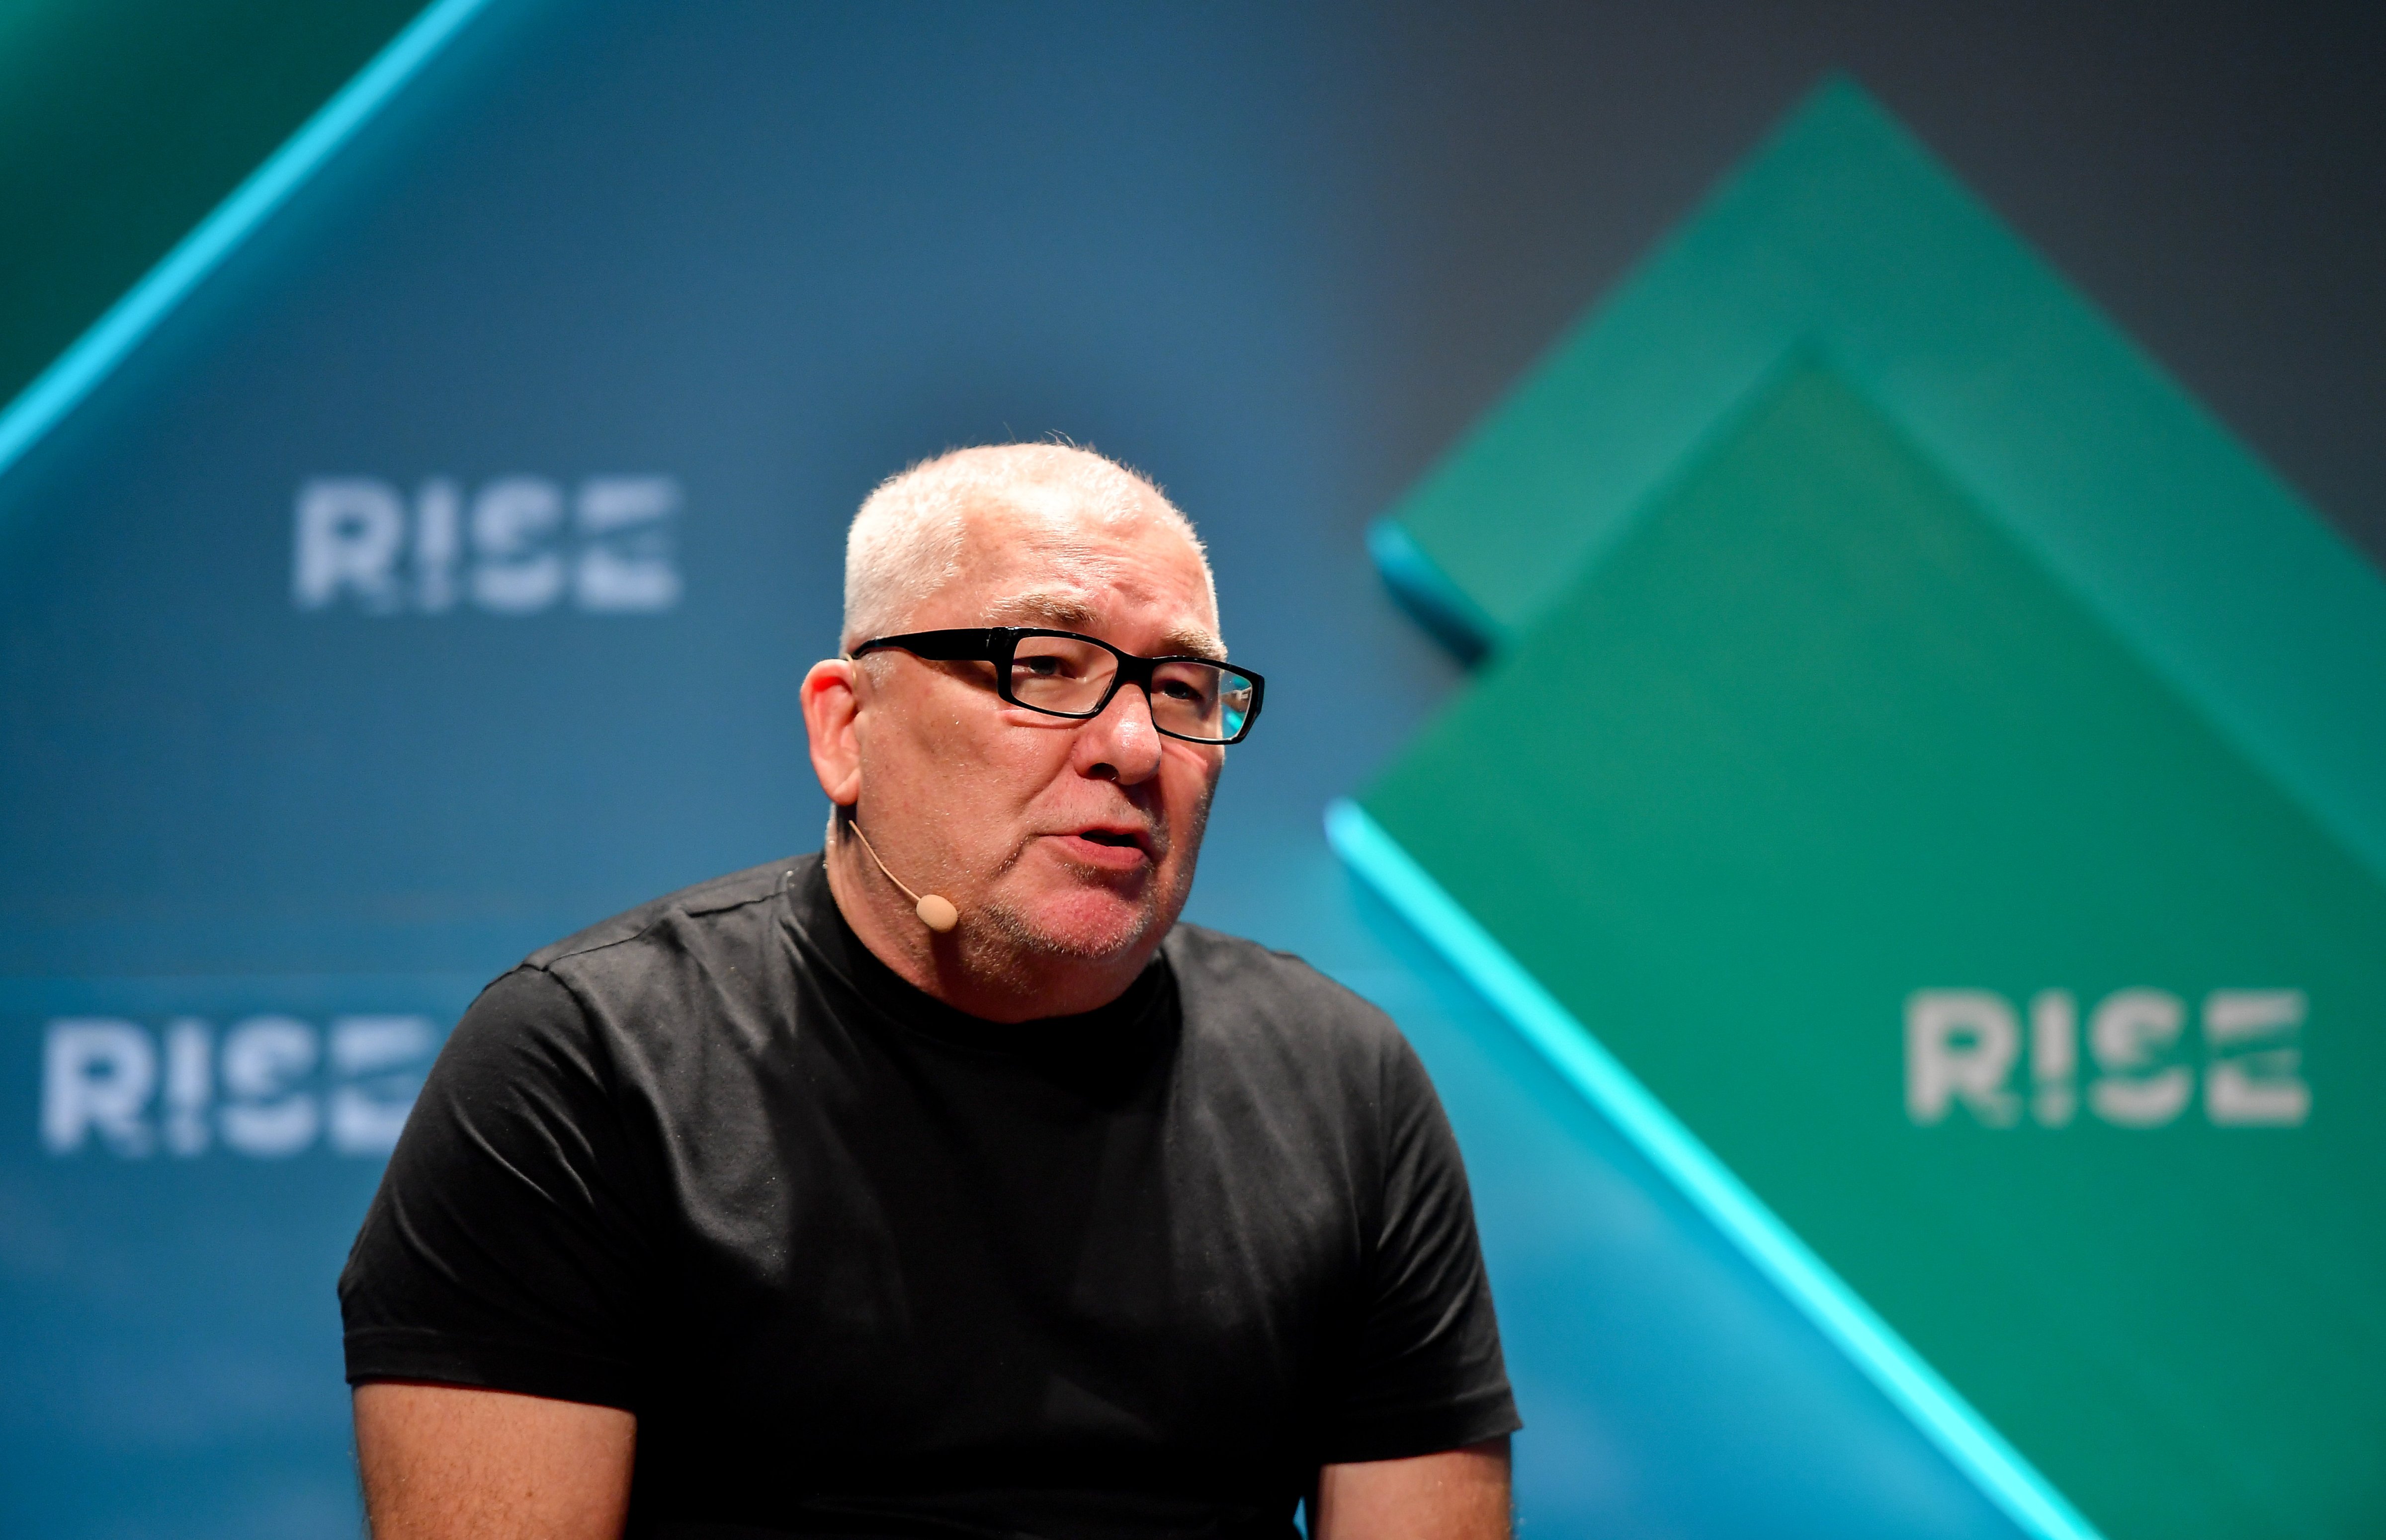 Tim Kobe, founder, Eight Inc, speaks during day one of RISE 2019 at the Hong Kong Convention and Exhibition Centre in Hong Kong on July 9 2019 (Seb Daly—Sportsfile via Getty Images)